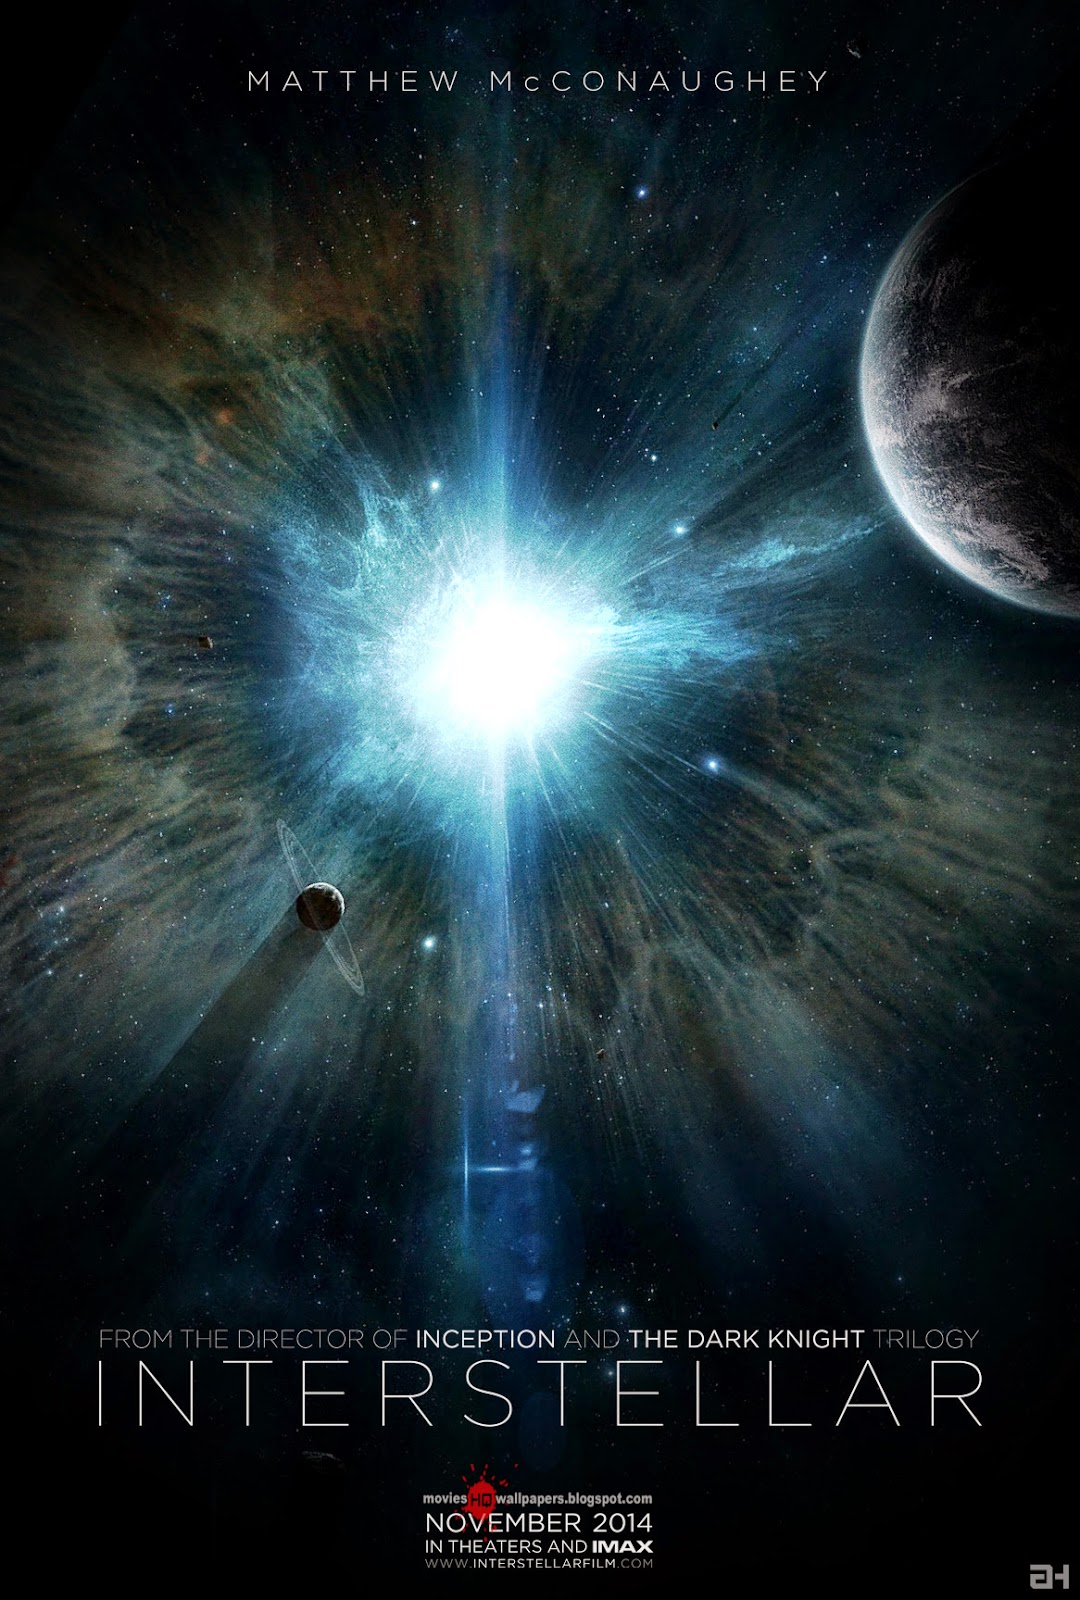 poster wallpaper,sky,astronomical object,universe,poster,movie